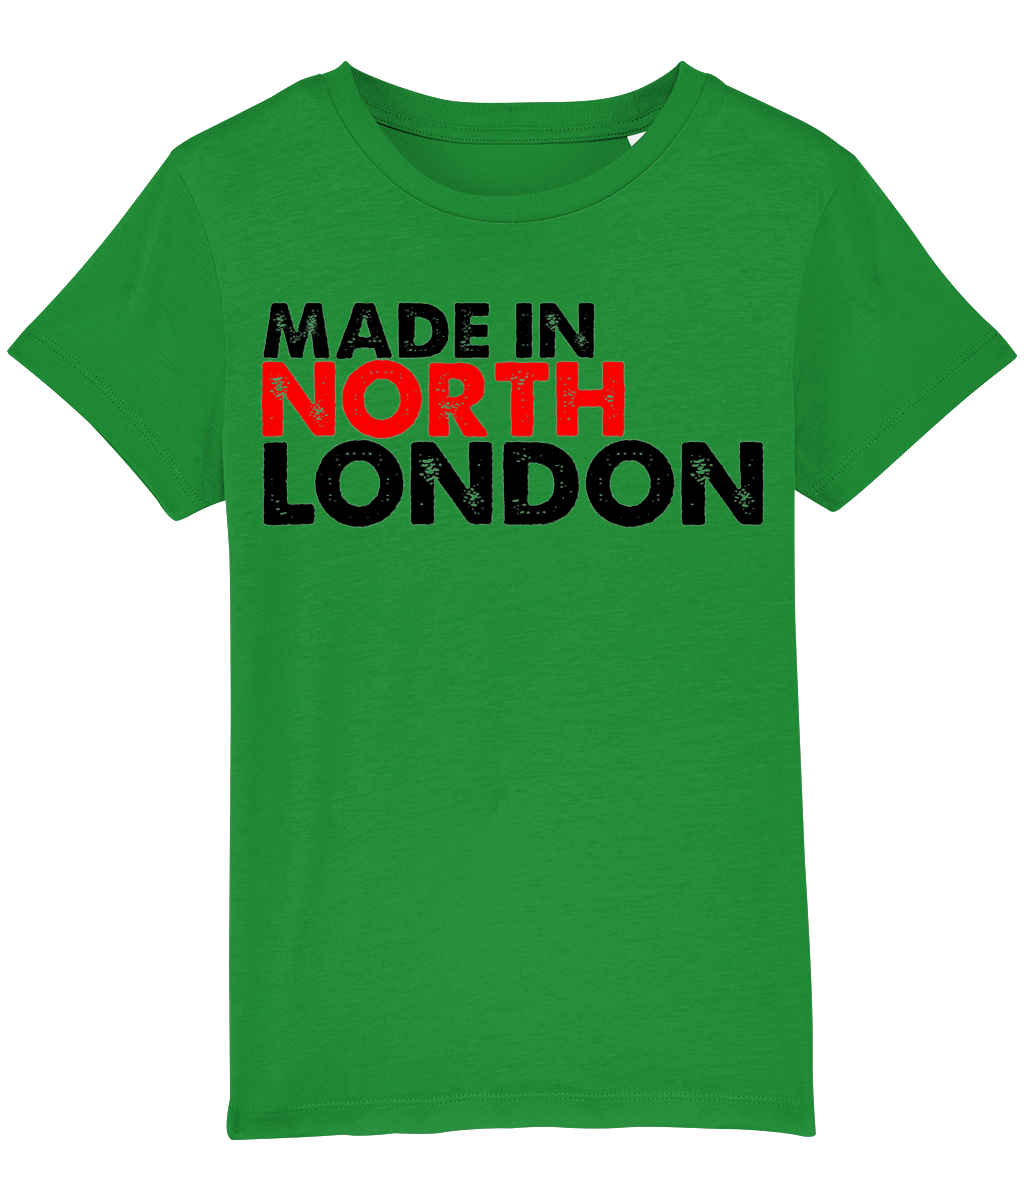 Made in North London Kids T-Shirt